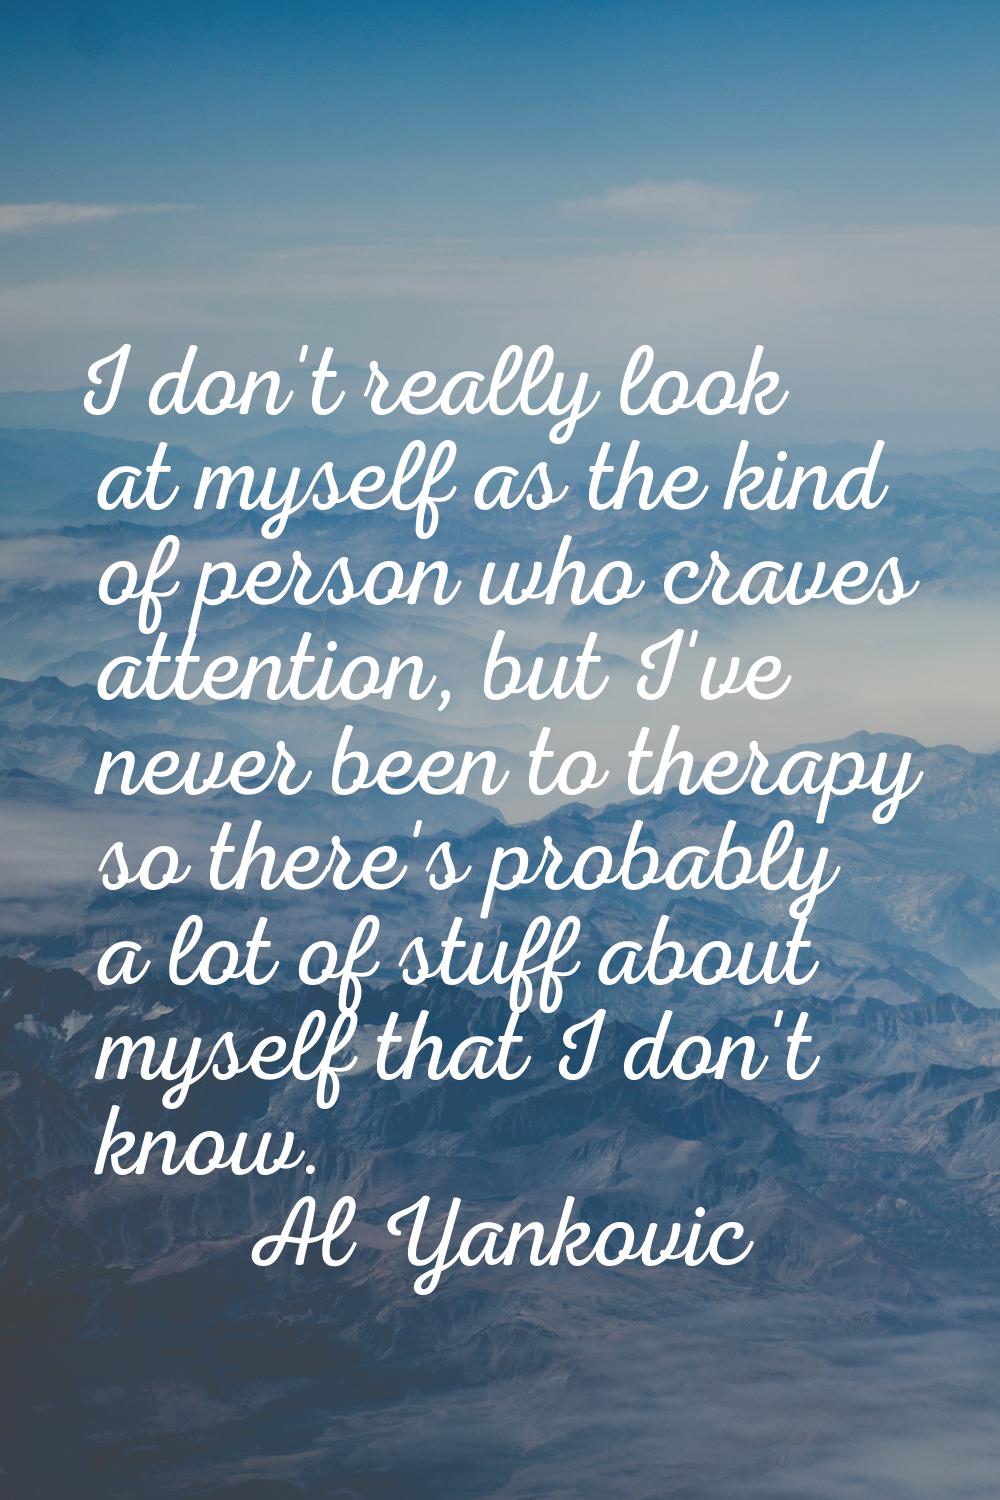 I don't really look at myself as the kind of person who craves attention, but I've never been to th